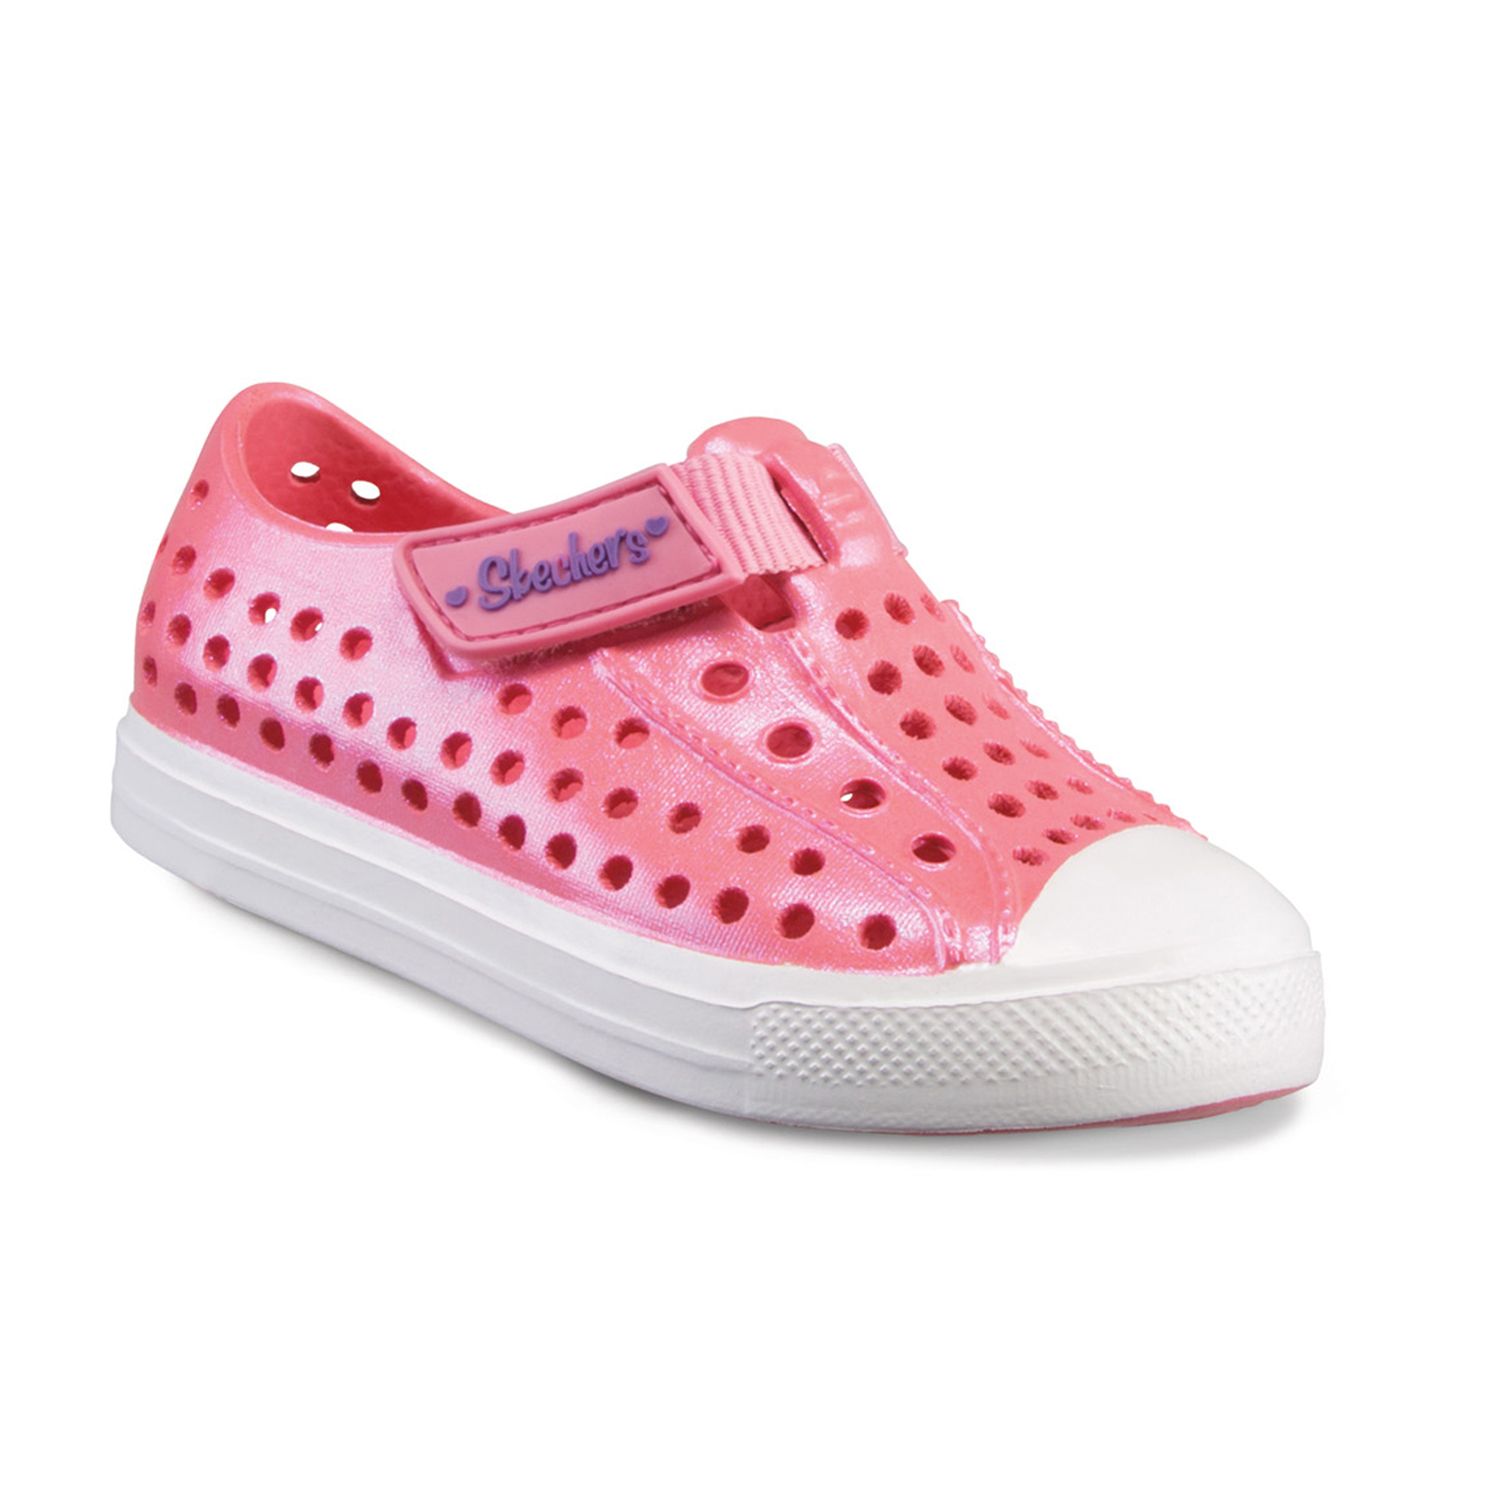 skechers water shoes toddler